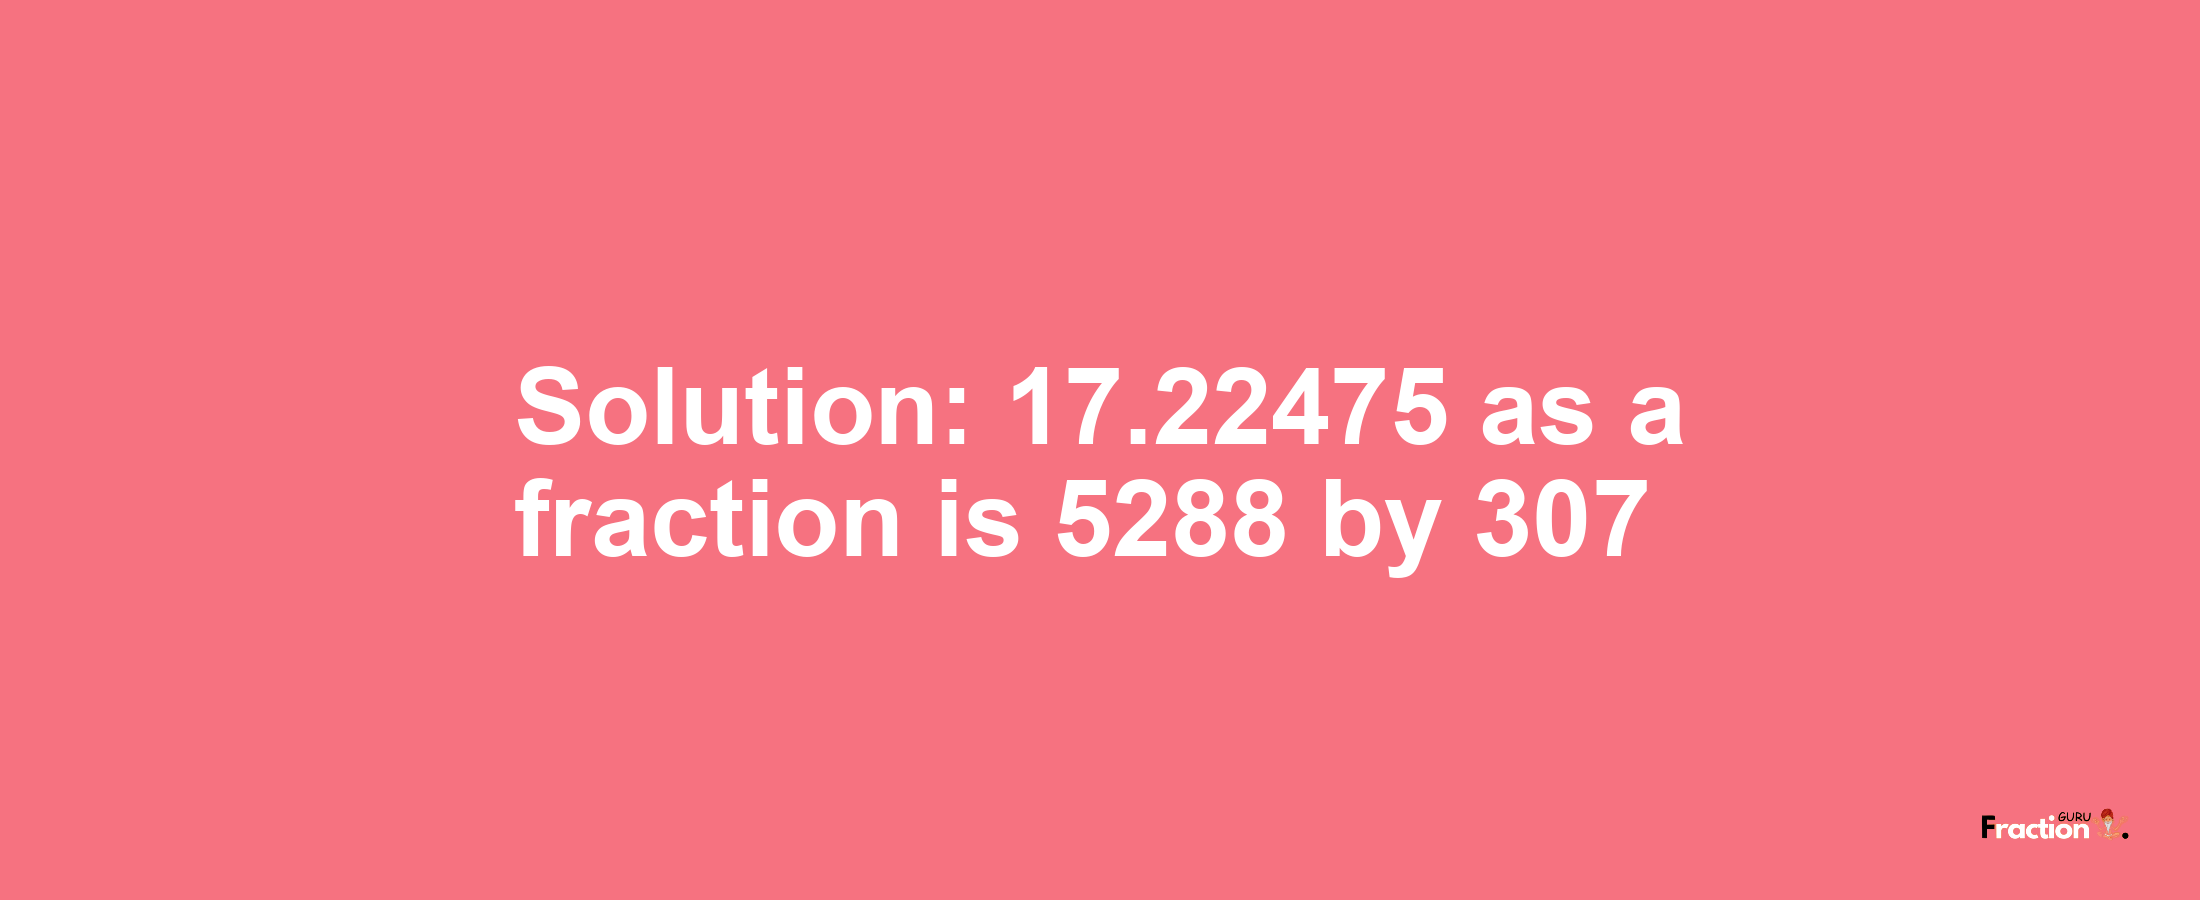 Solution:17.22475 as a fraction is 5288/307